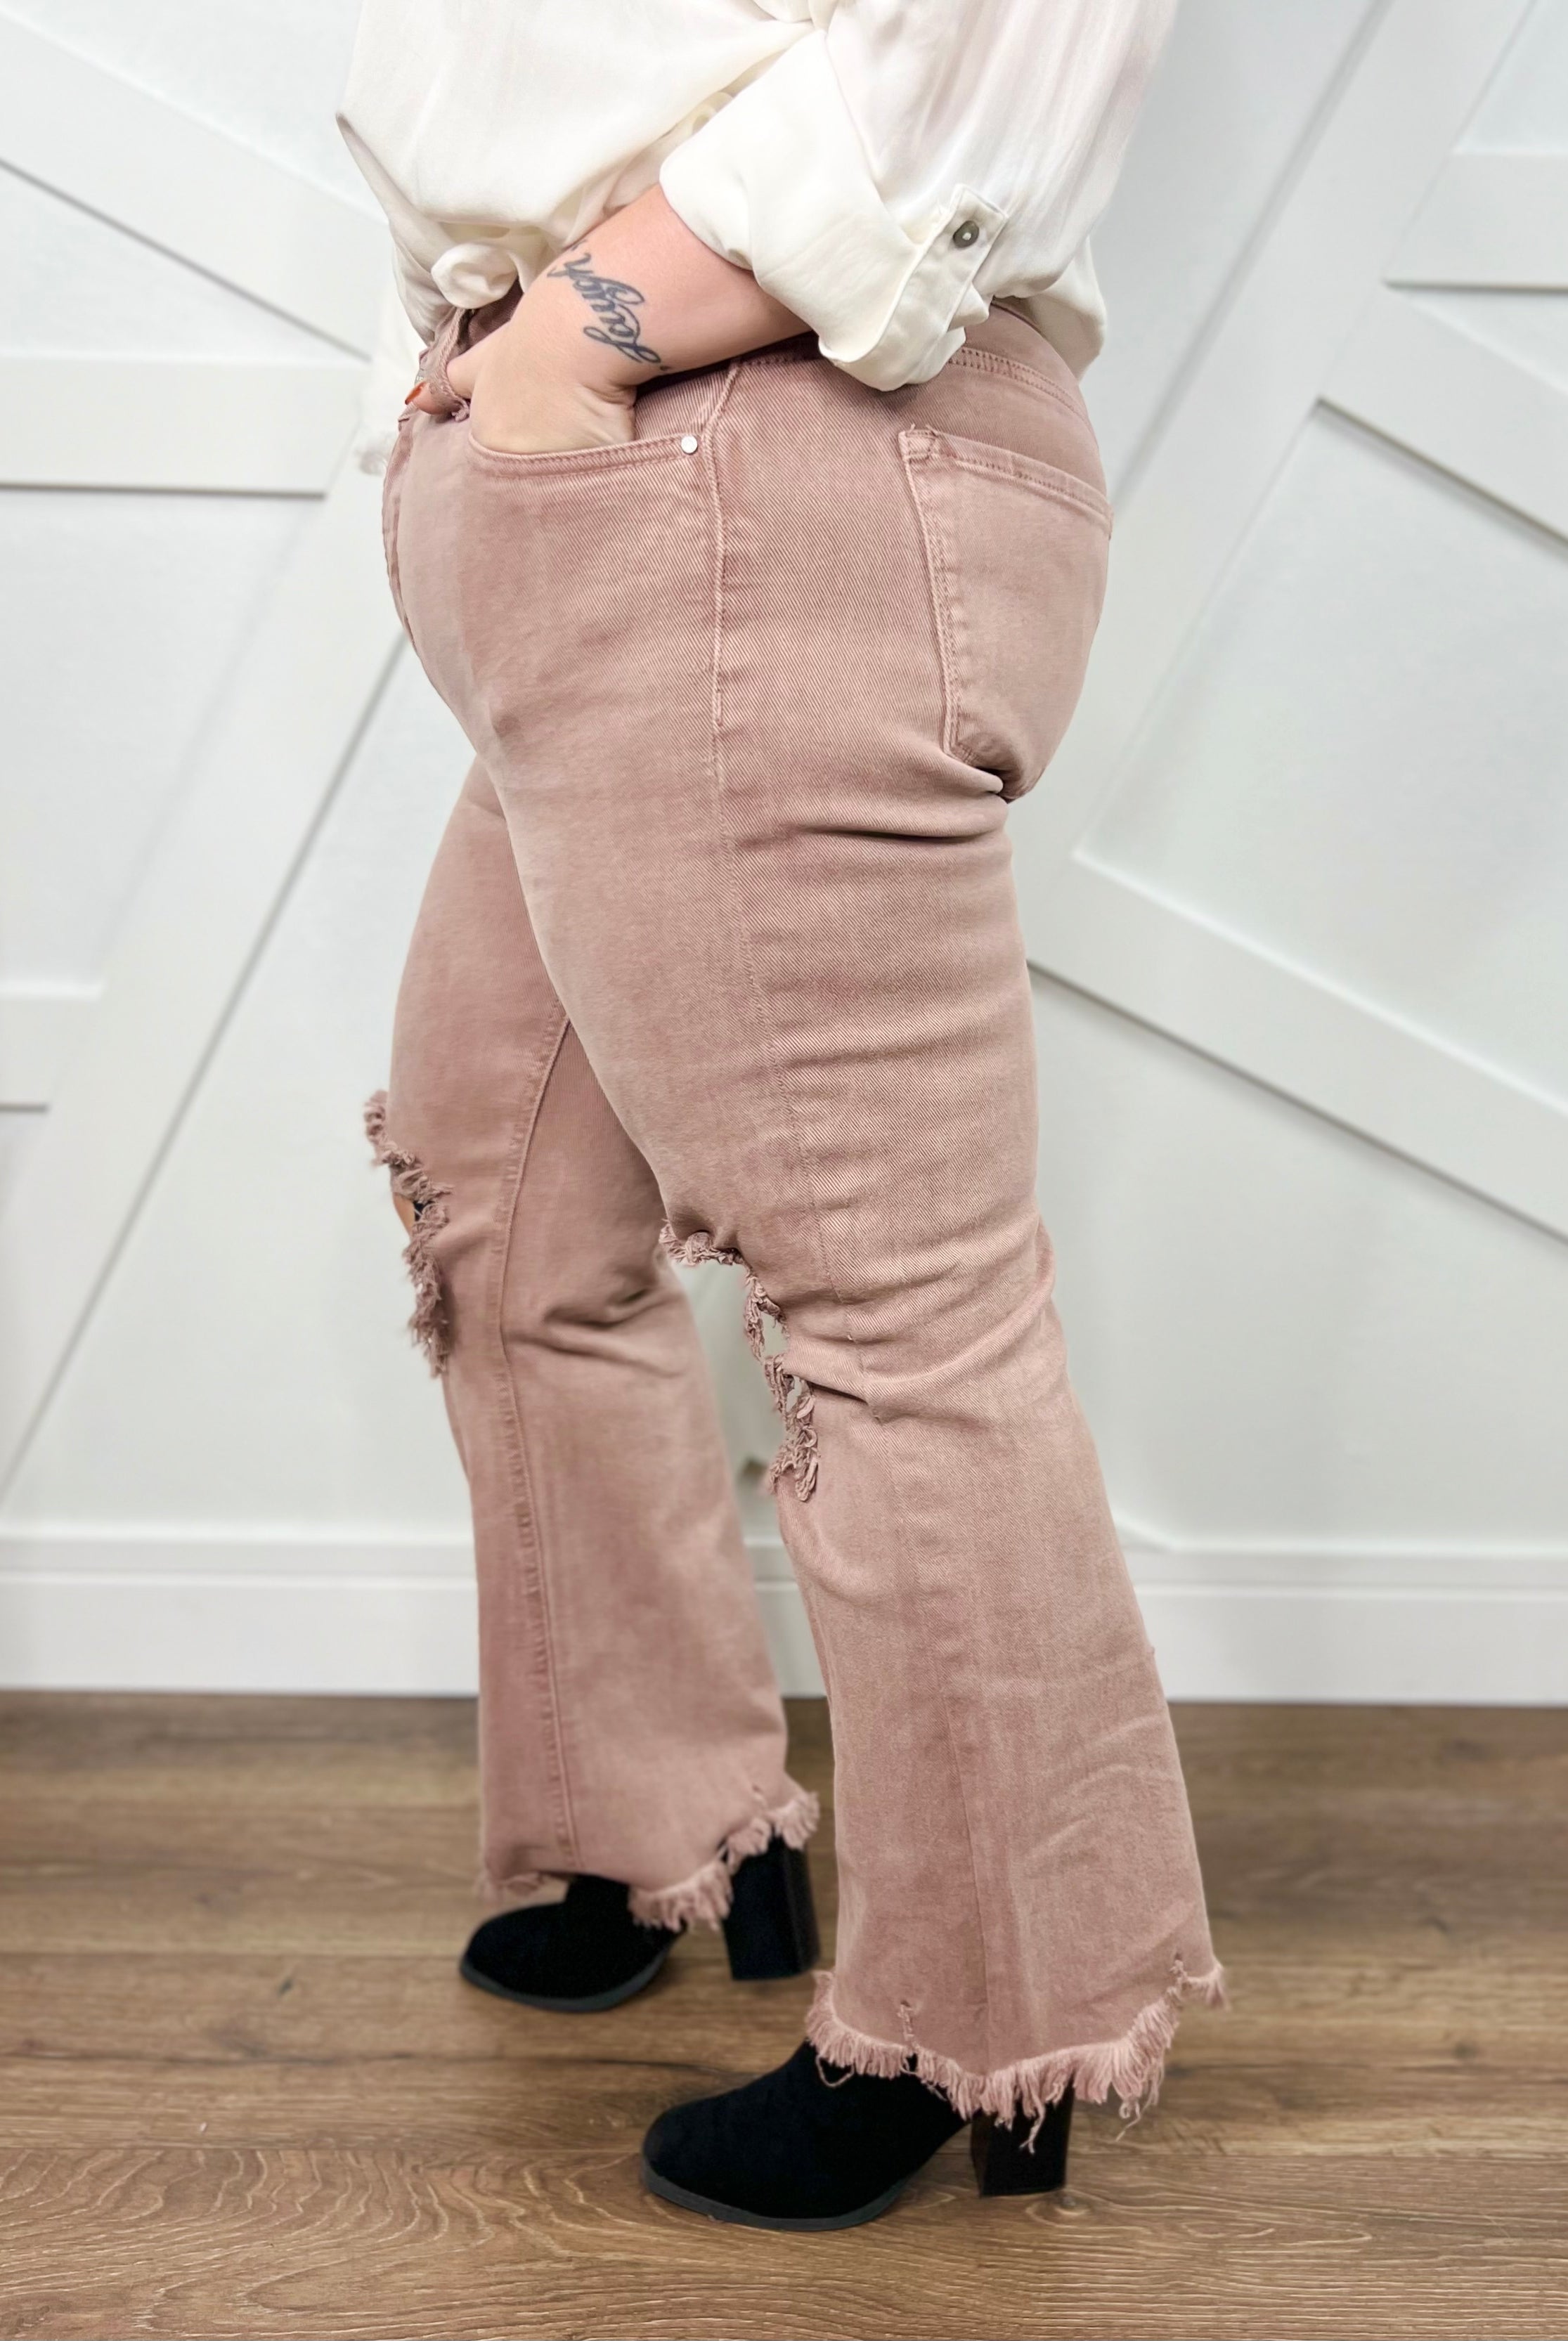 Defining Limits Straight Leg by Risen-190 Jeans-Risen Jeans-Heathered Boho Boutique, Women's Fashion and Accessories in Palmetto, FL